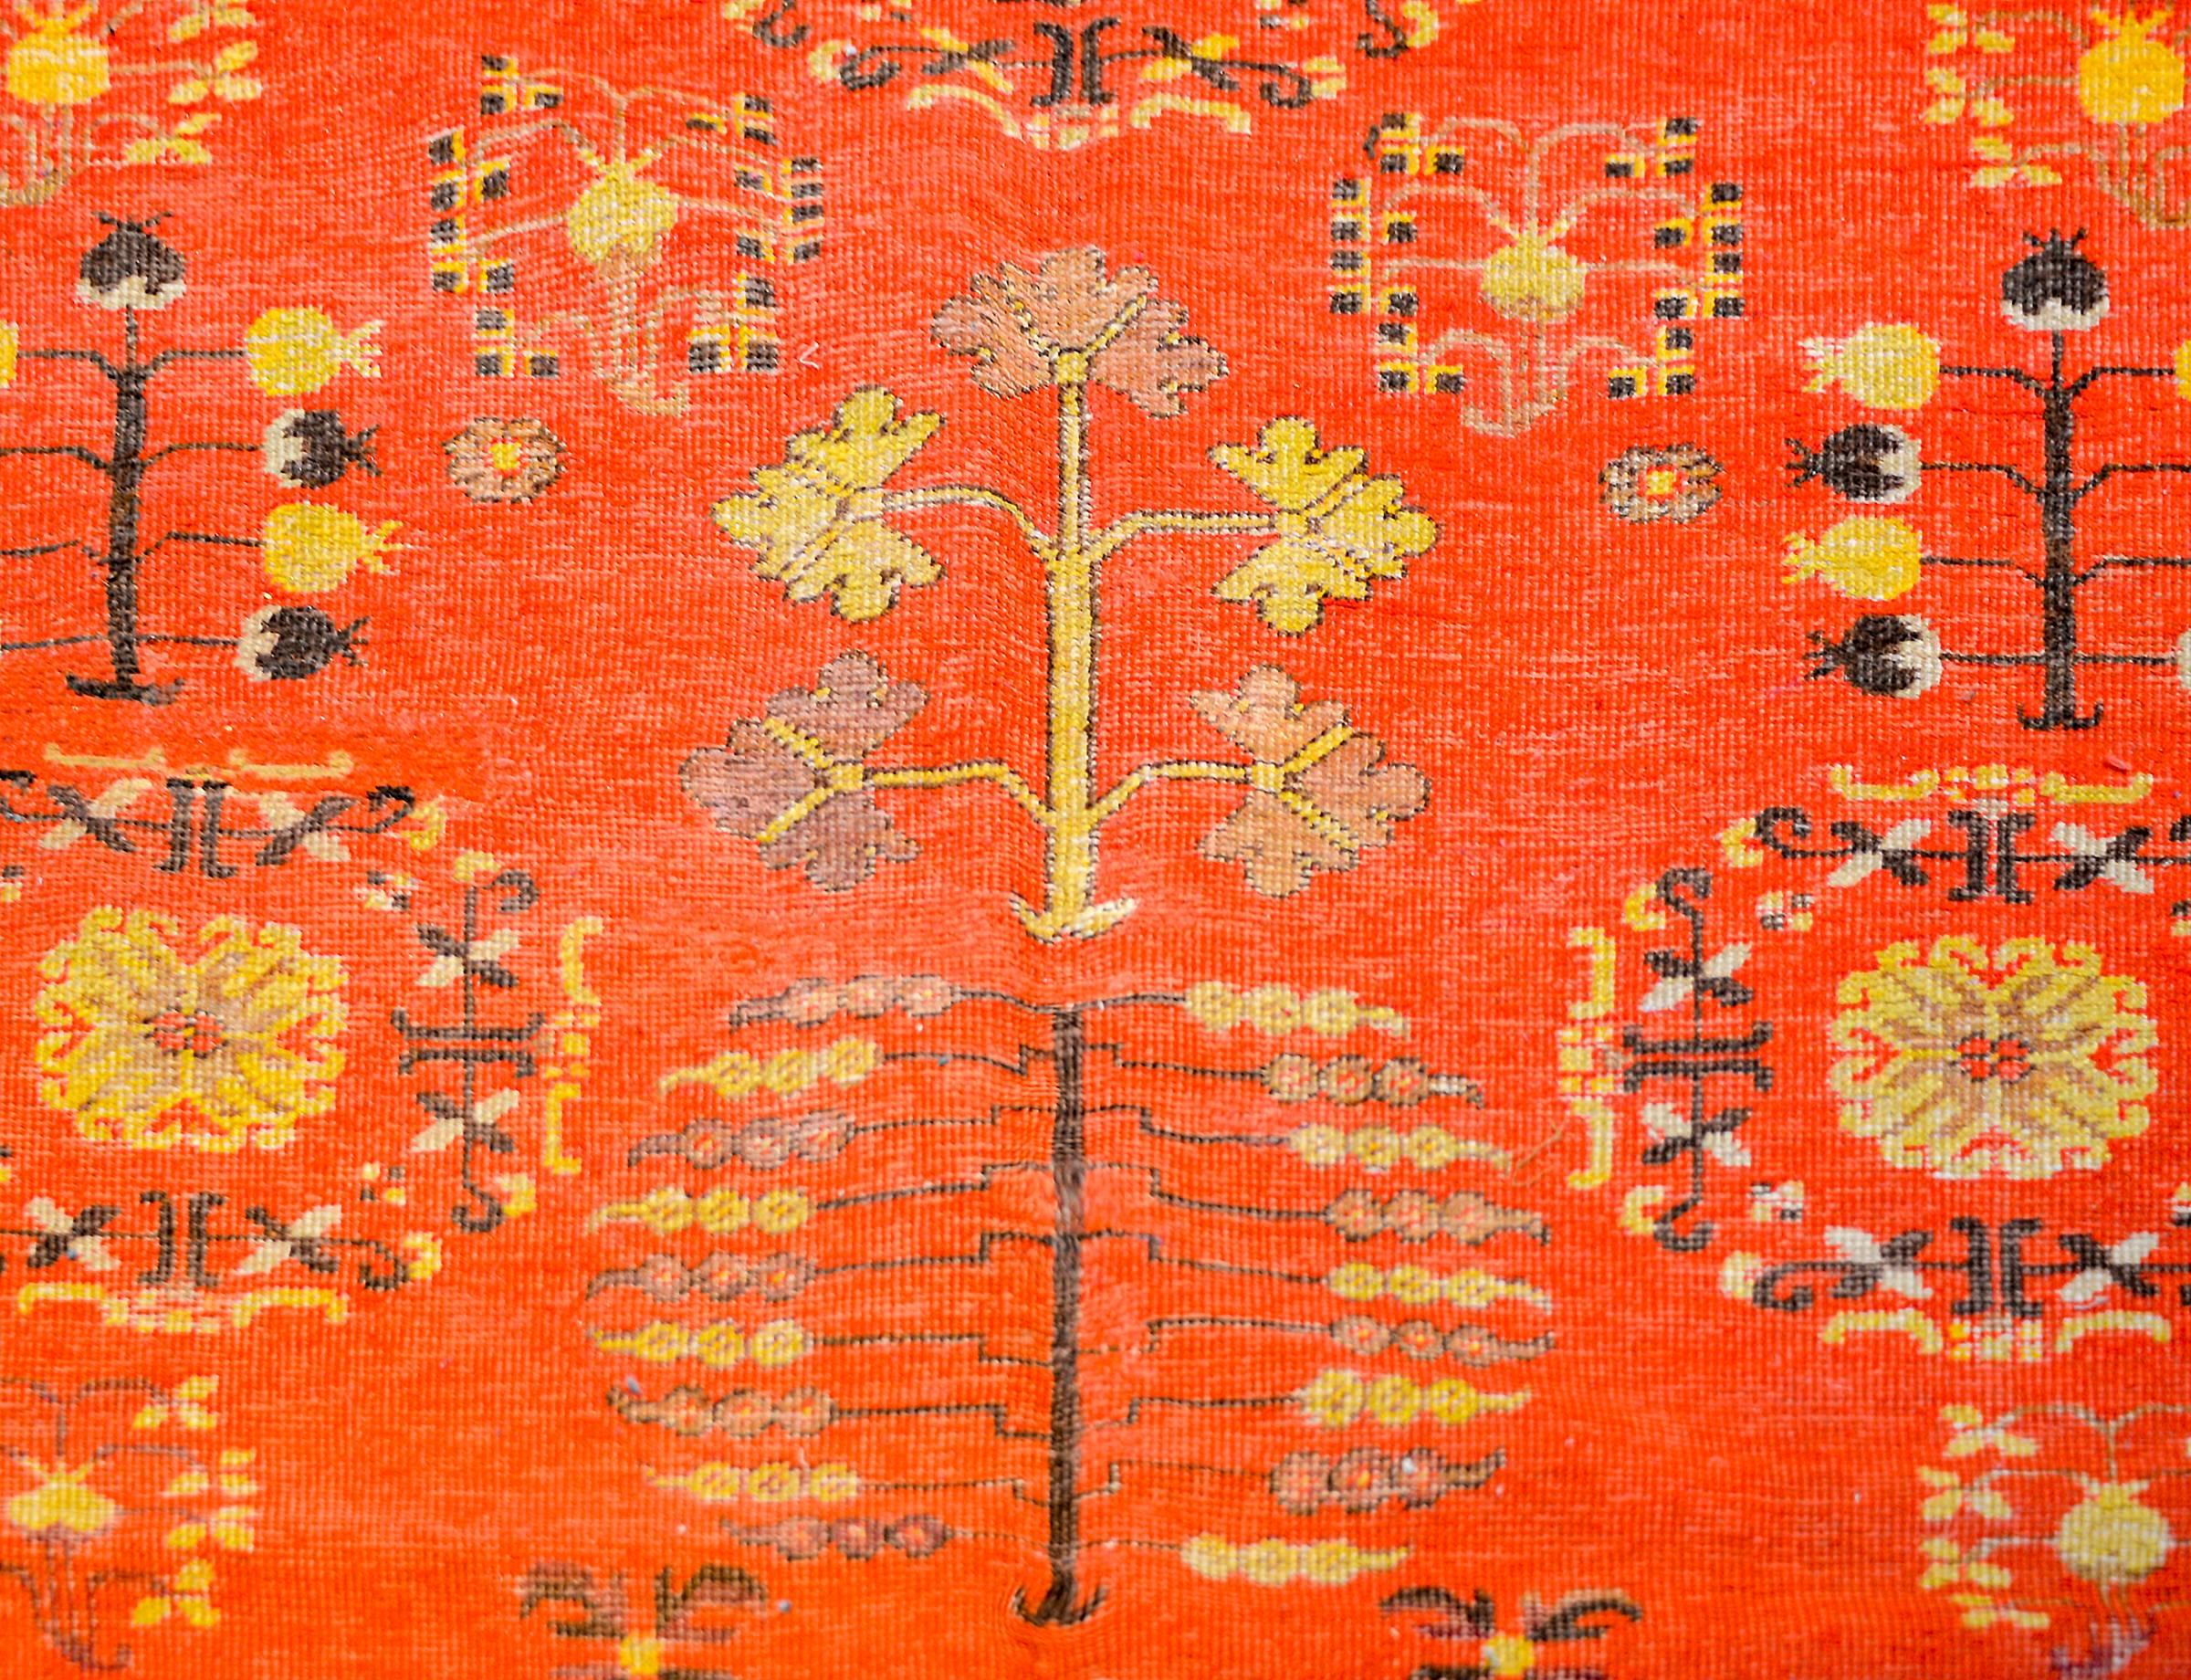 Central Asian Beautiful Early 20th Century Khotan Rug For Sale